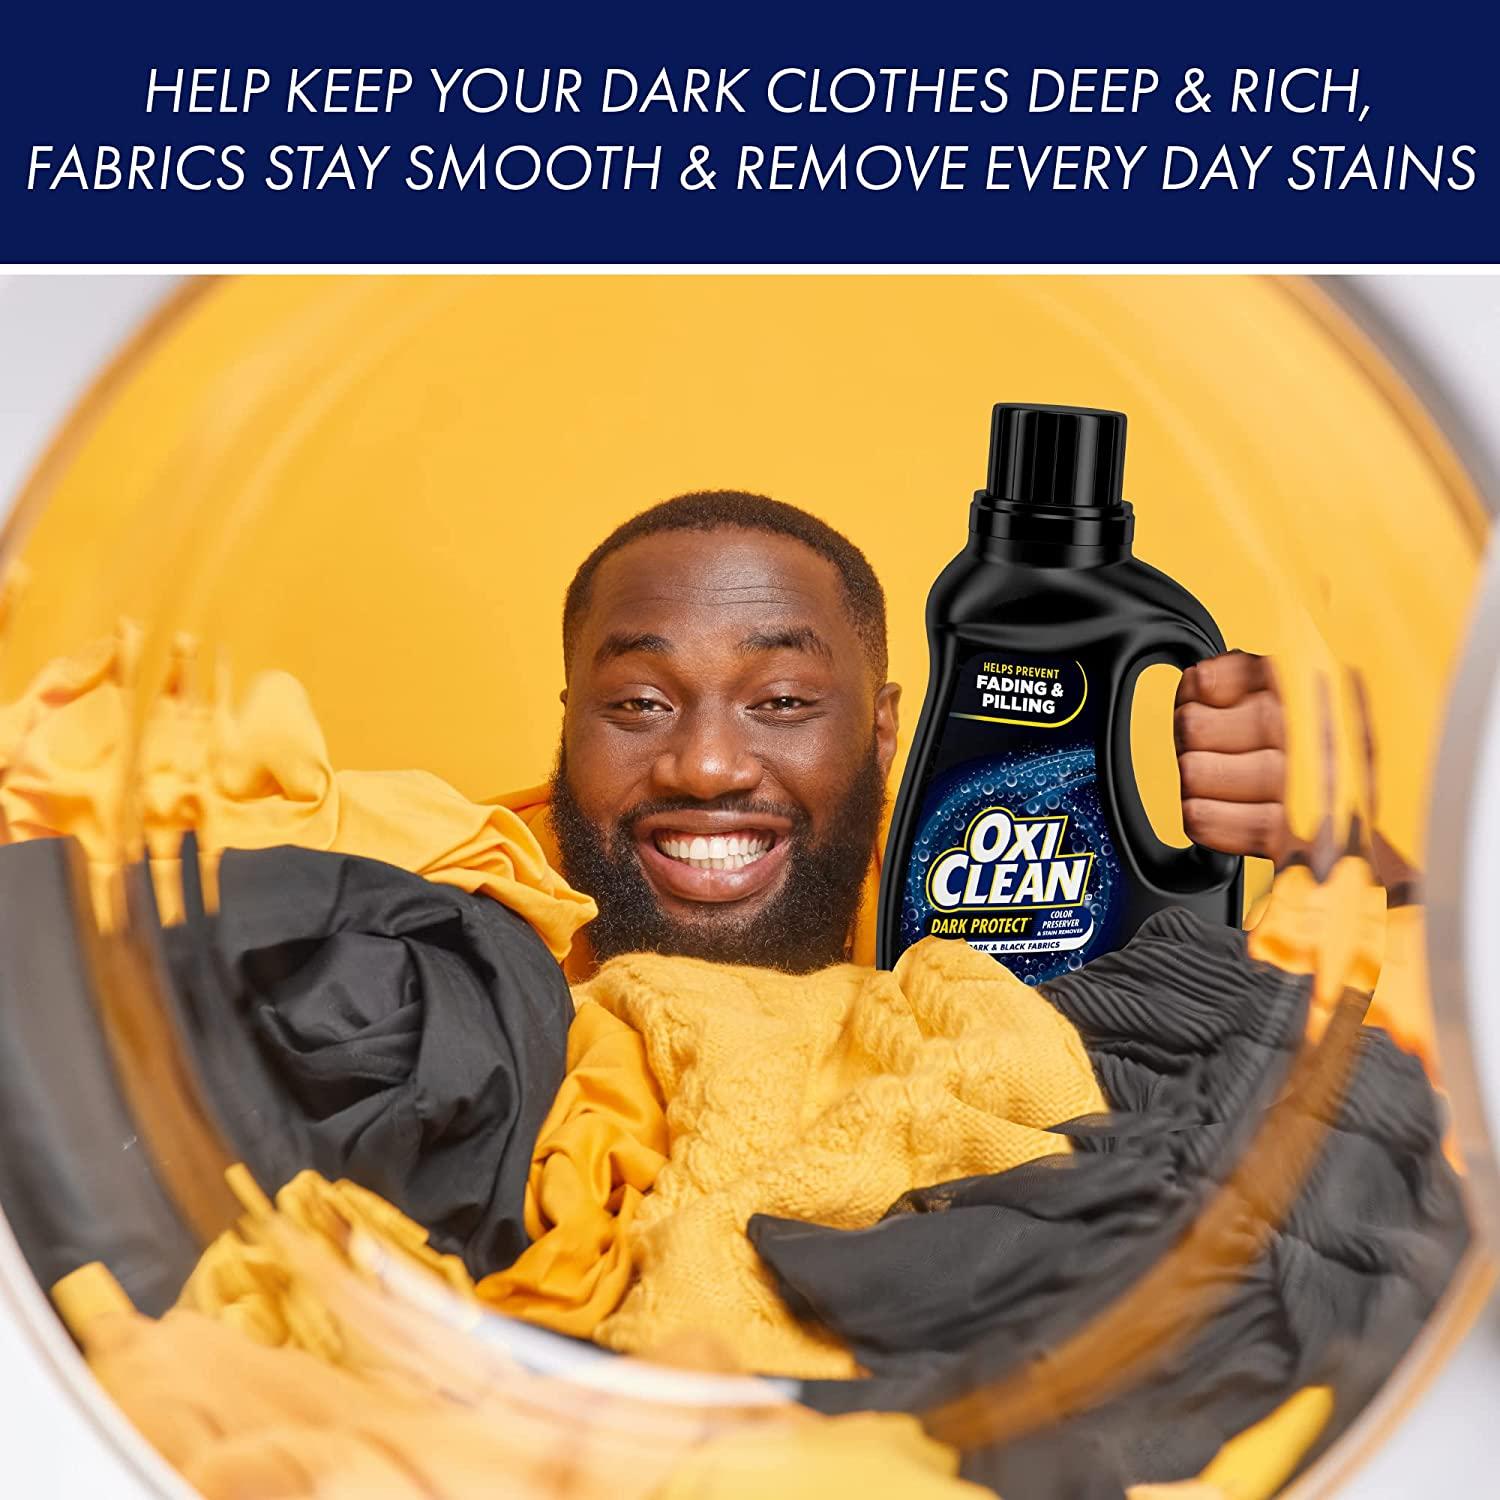 Welcome to the family, Dark Protect! Its Anti-Fade Technology keeps dark  clothes looking like new. Head to Target and grab some today., By OxiClean